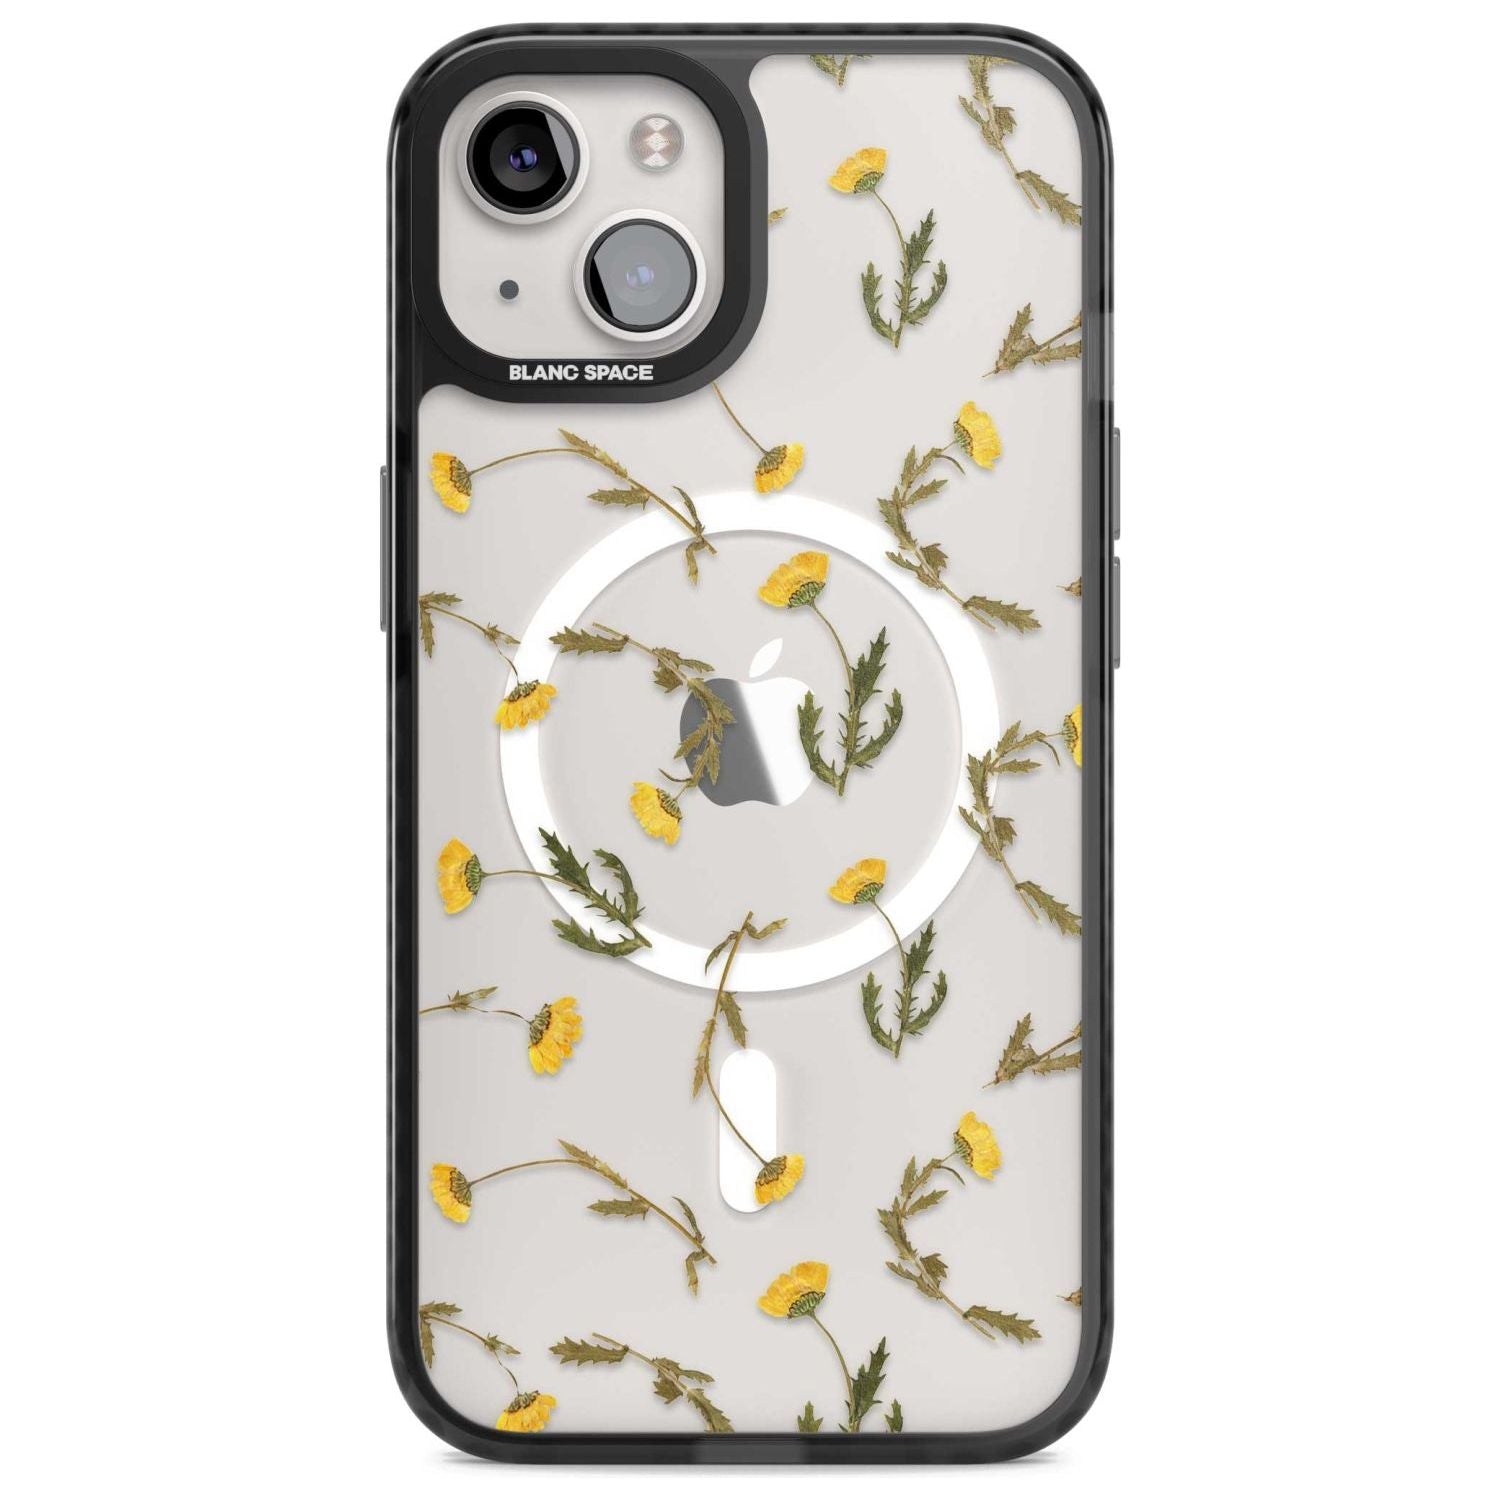 Long Stemmed Wildflowers - Dried Flower-Inspired Phone Case iPhone 15 Plus / Magsafe Black Impact Case,iPhone 15 / Magsafe Black Impact Case,iPhone 14 Plus / Magsafe Black Impact Case,iPhone 14 / Magsafe Black Impact Case,iPhone 13 / Magsafe Black Impact Case Blanc Space